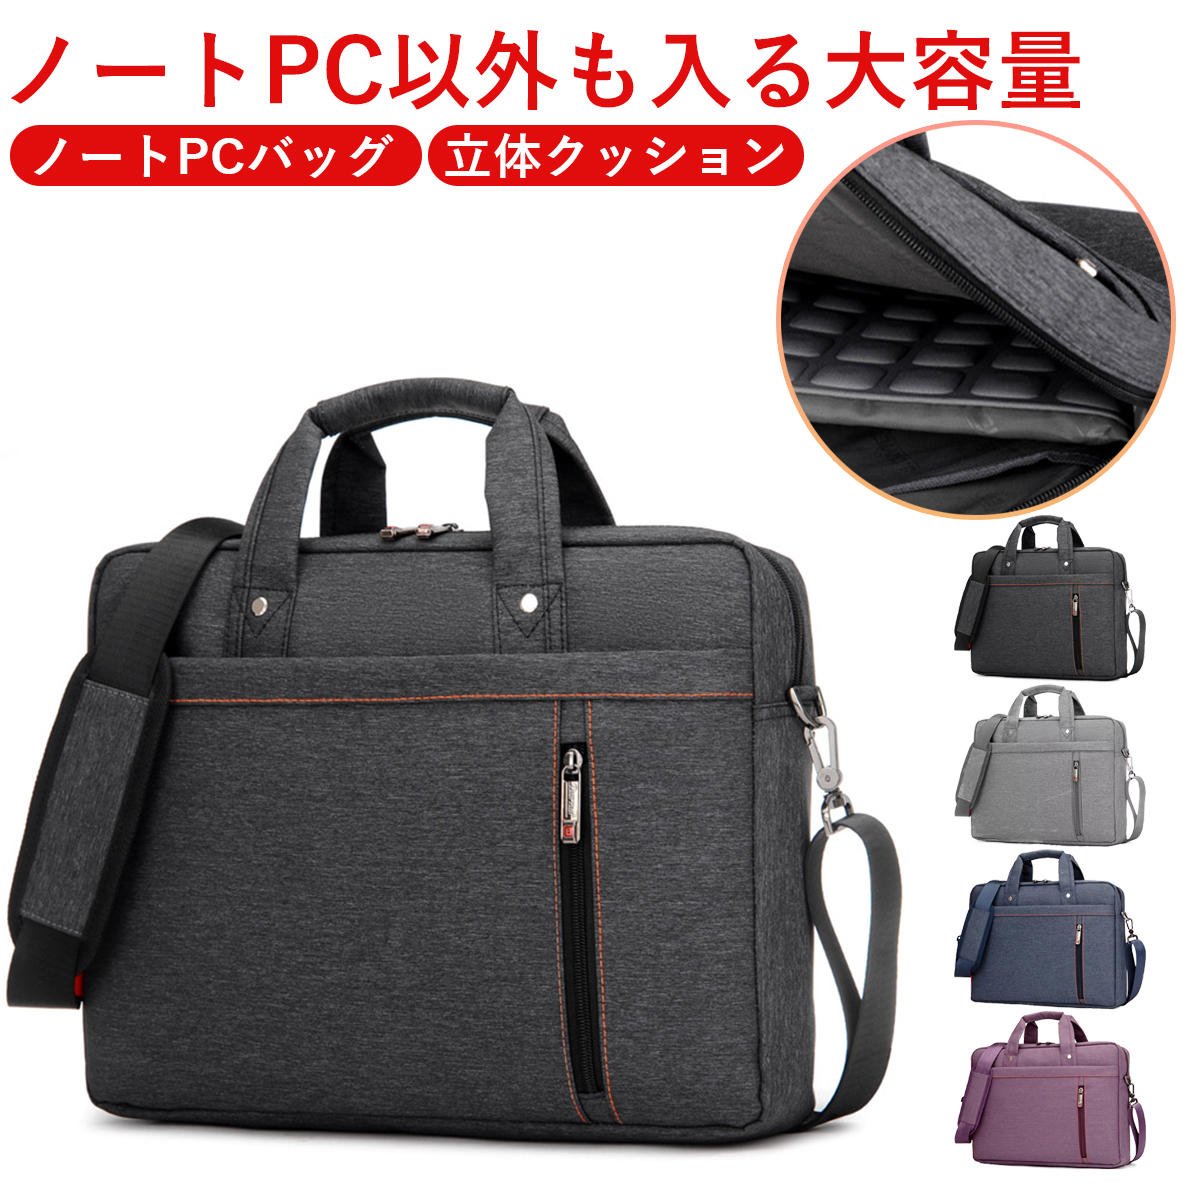  laptop case 16 -inch 14 -inch 13 15 -inch 17 -inch stylish waterproof impact absorption shoulder high capacity 